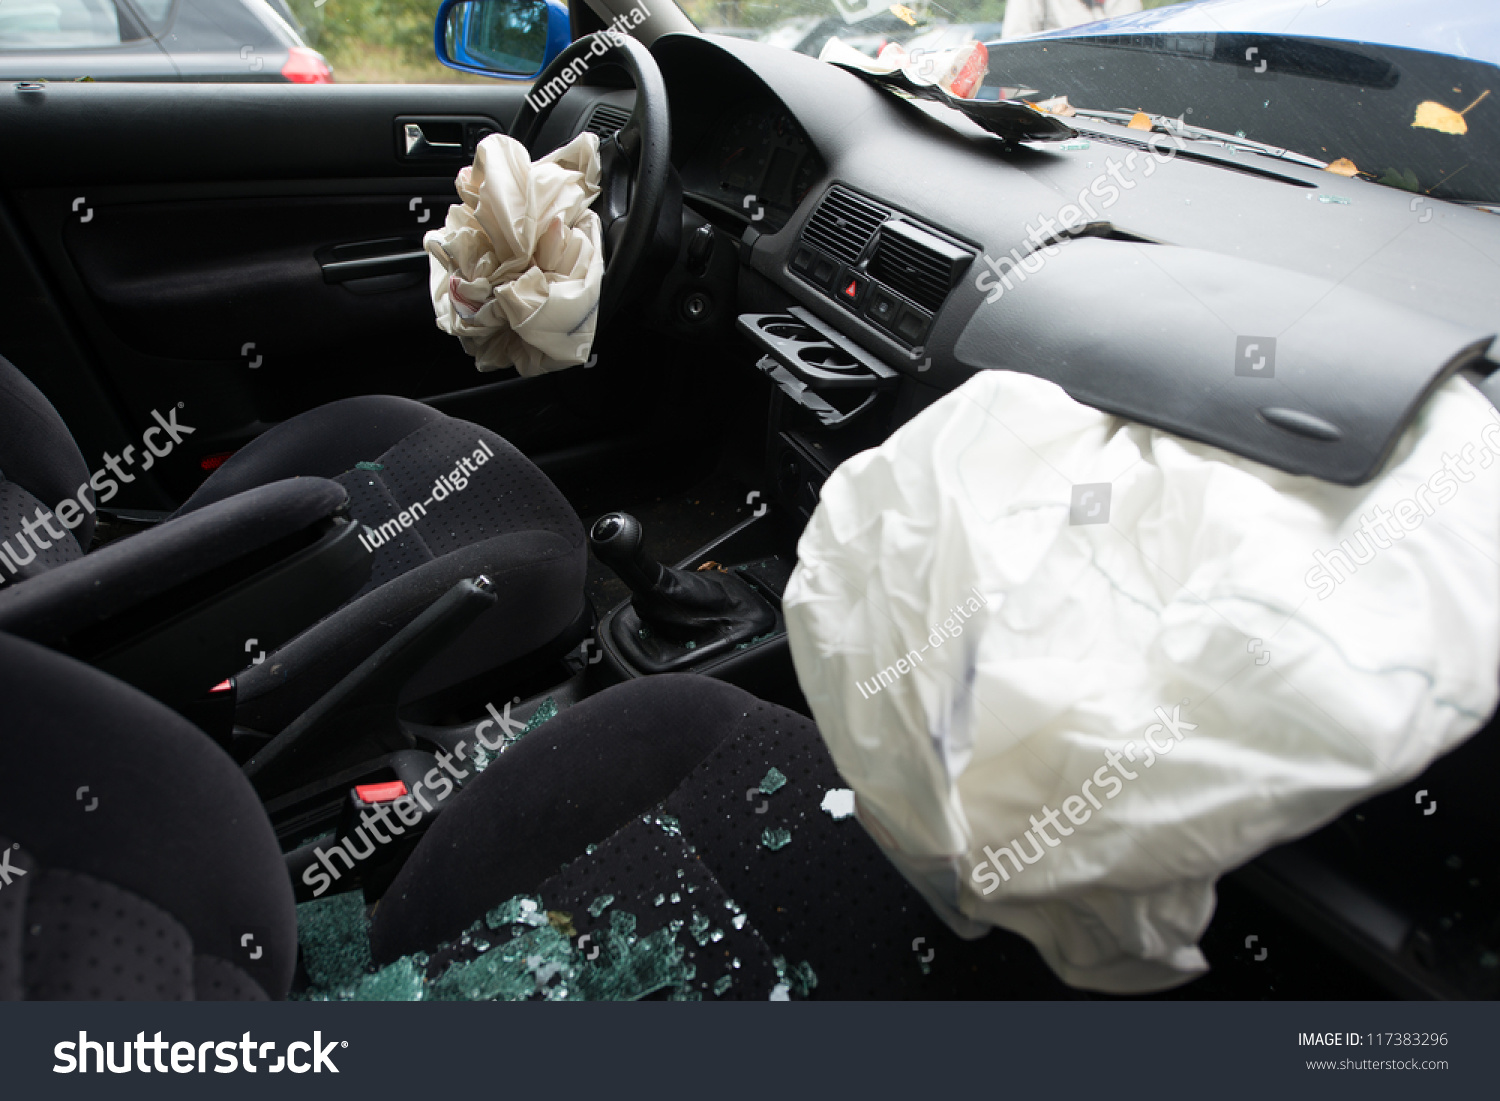 damaged car with deployed airbags #117383296